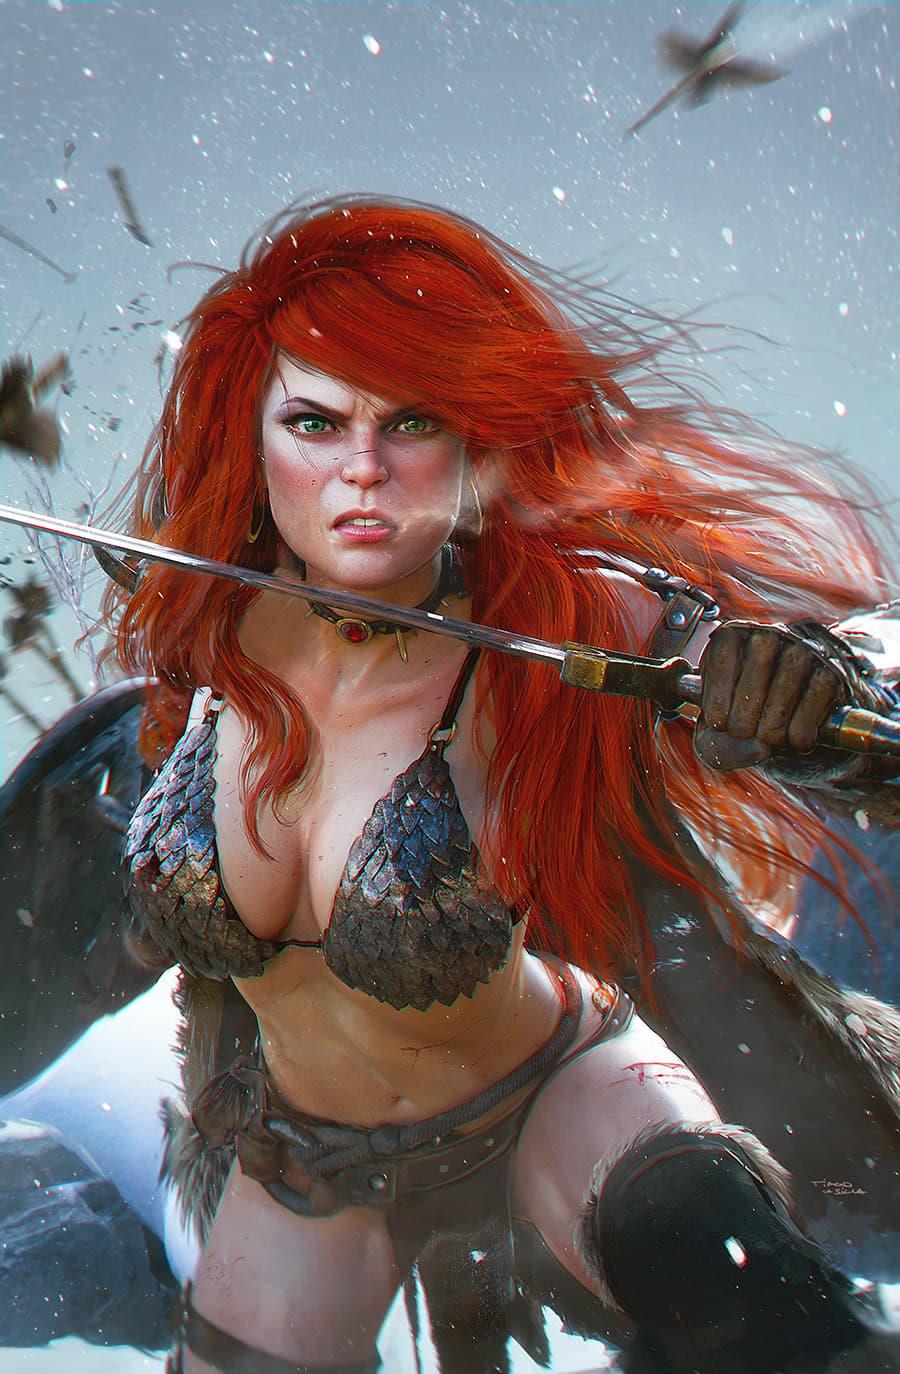 RED SONJA PRICE OF BLOOD #1 TIAGO DA SILVA VIRGIN VARIANT LIMITED TO 500